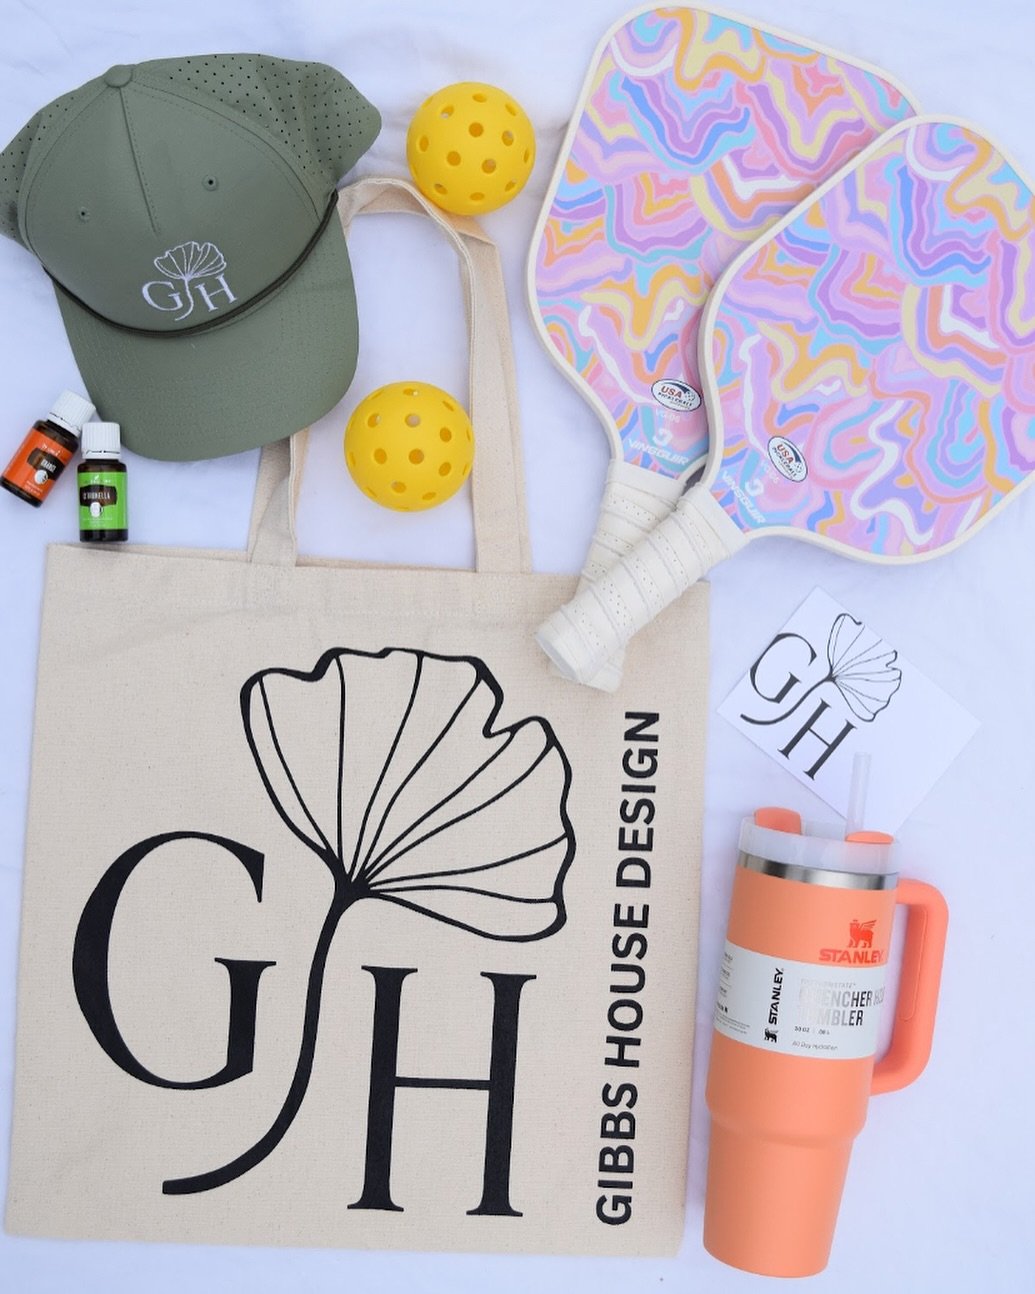 ✨ WINNER ✨ It is our delight to congratulate @karikstanley on winning our Mother&rsquo;s Day giveaway! She will be receiving all of the items pictured + a choice of a green or white Gibbs House Design hat! Thank you to all whoever entered and Happy M